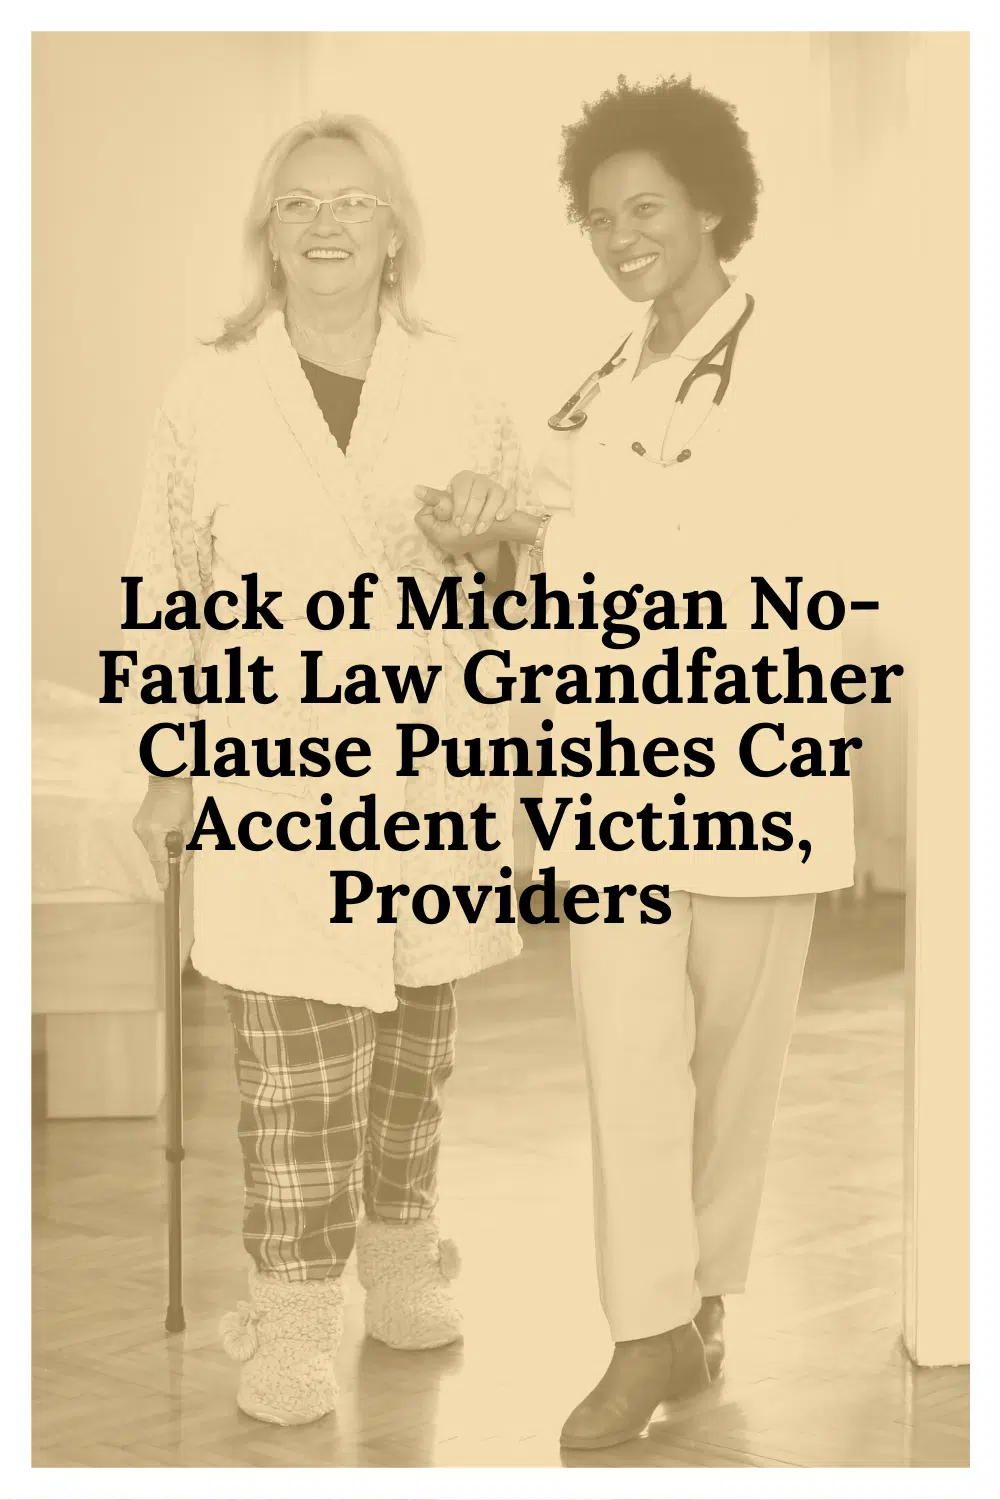 Lack of Michigan No-Fault Law grandfather clause punishes car accident victims, providers